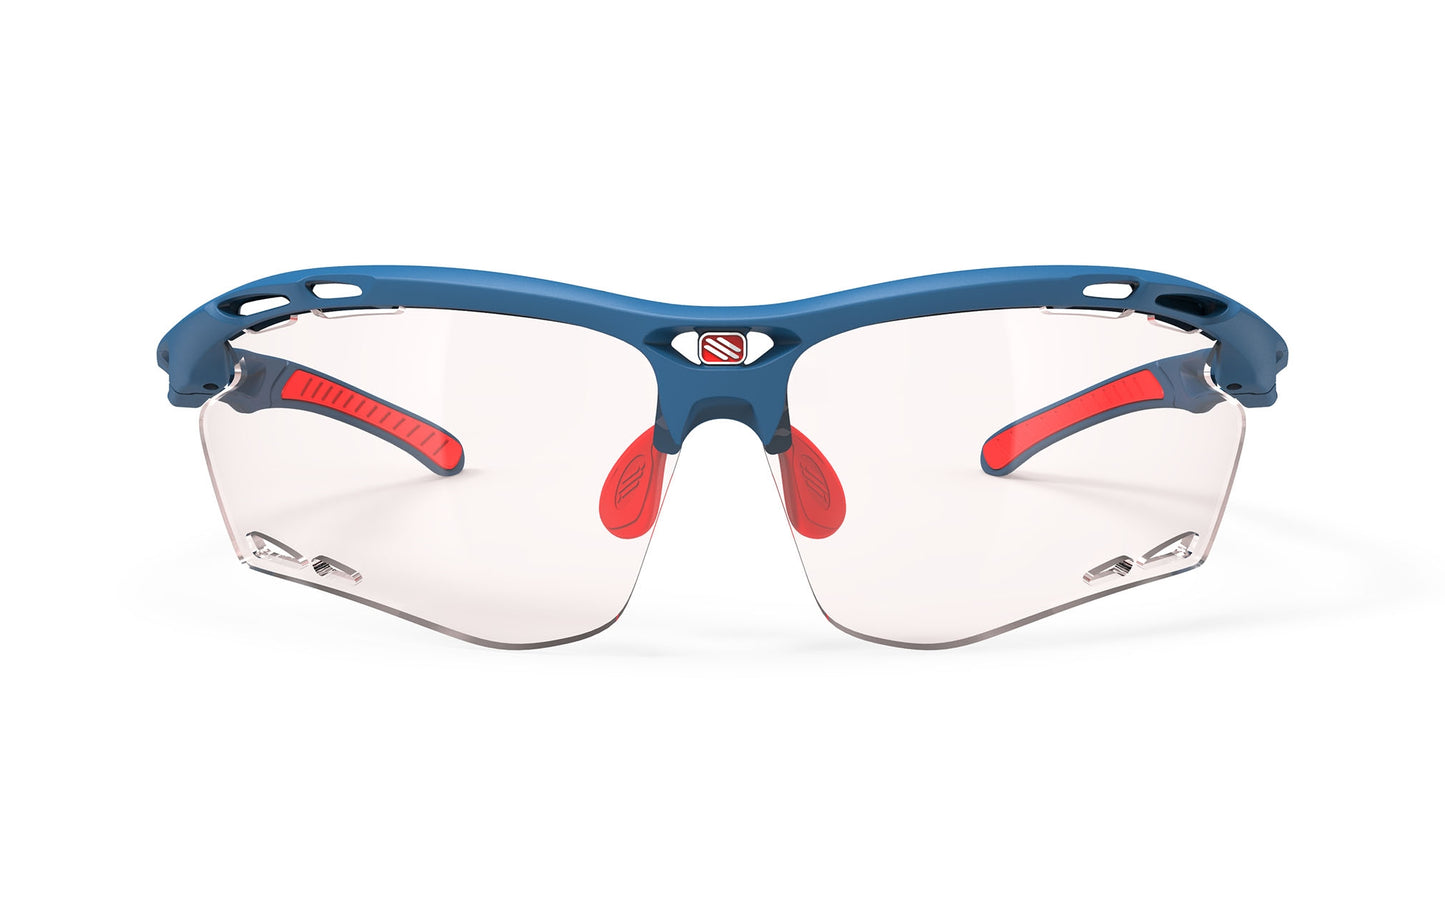 Load image into Gallery viewer, Rudy Project Propulse Pacific Blue Matte - Impactx Photochromic 2 Red Sunglasses
